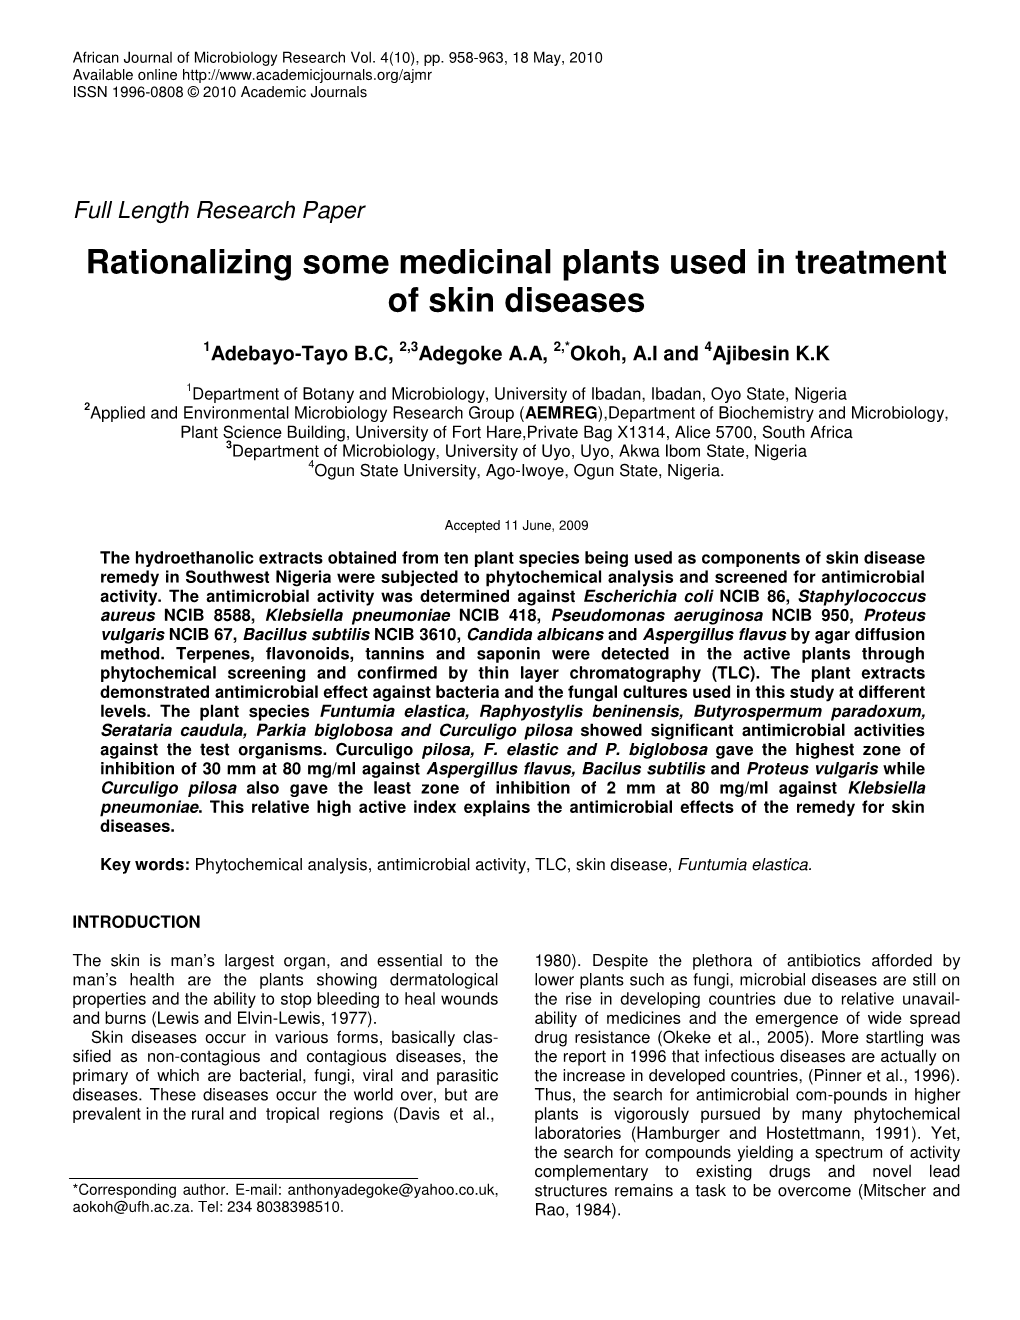 Rationalizing Some Medicinal Plants Used in Treatment of Skin Diseases